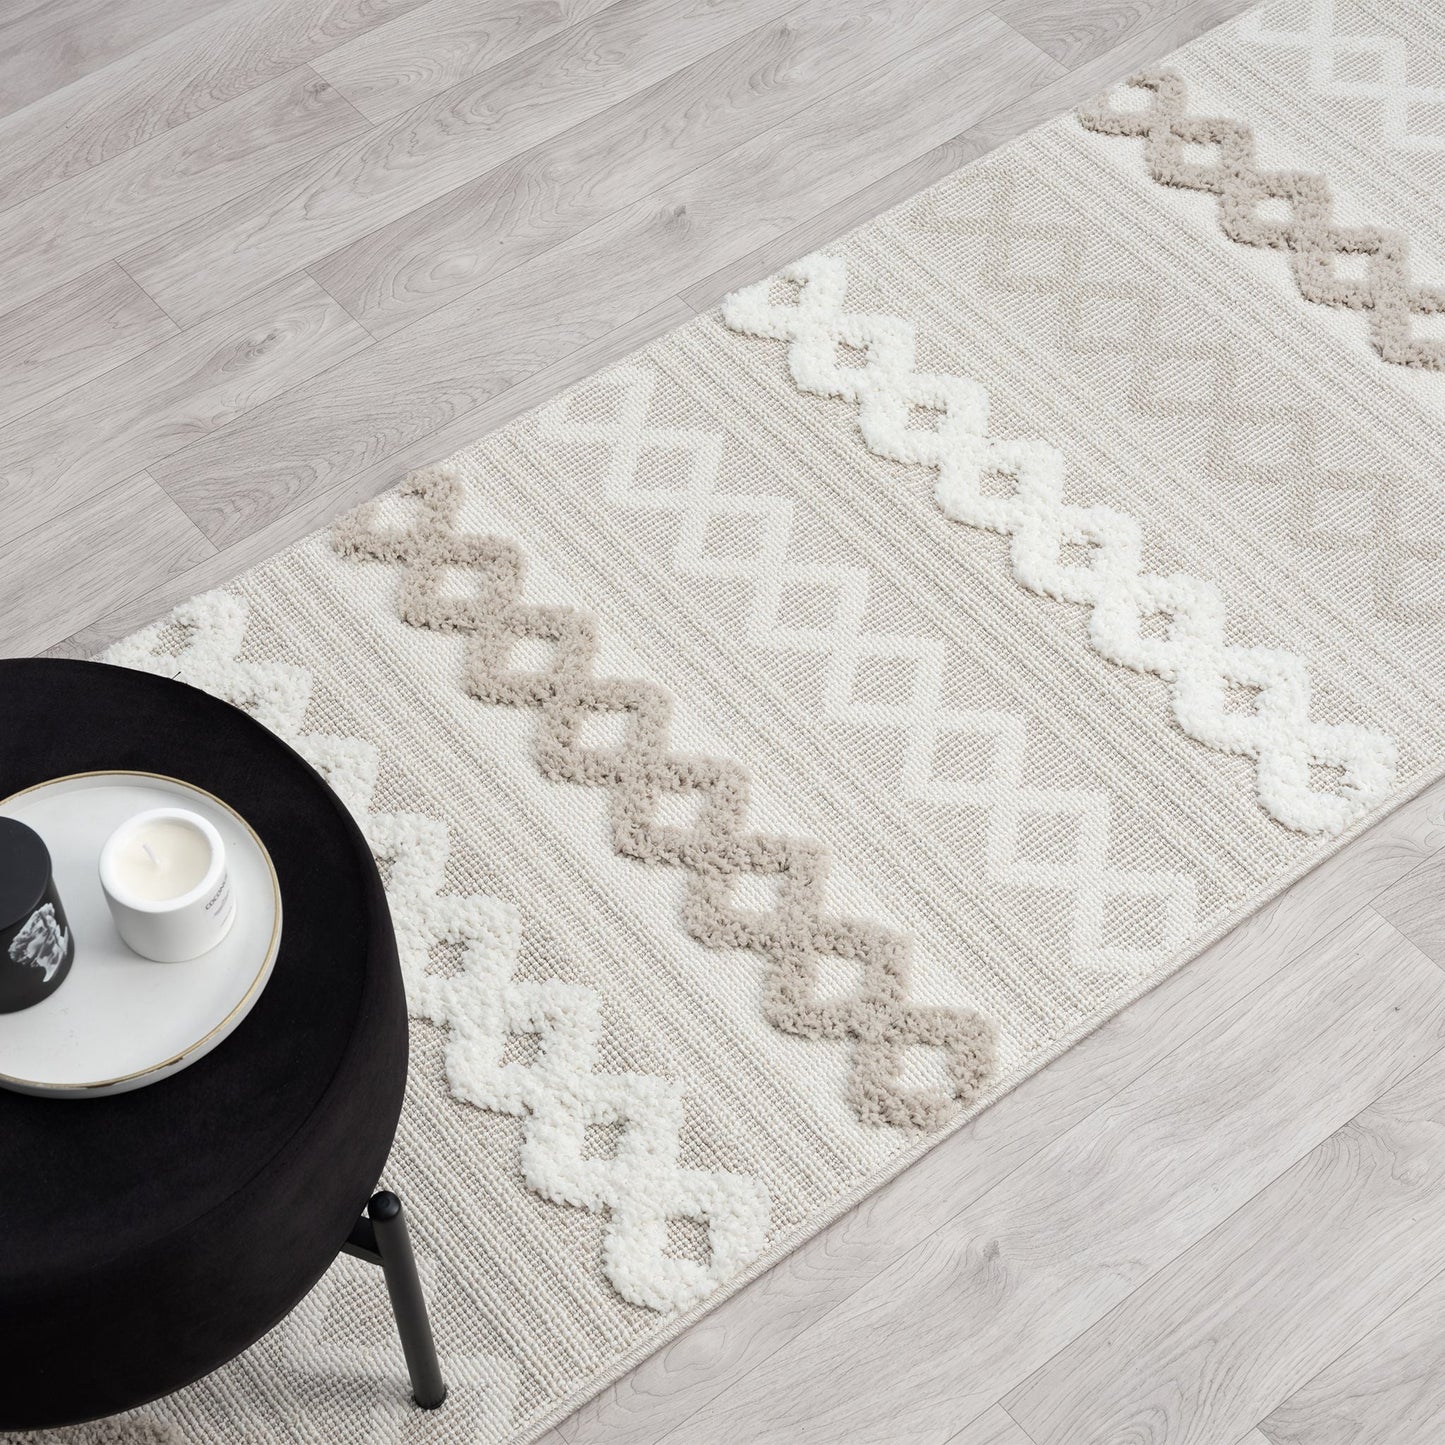 Cottage 542 Fawn Runner Saray Rugs